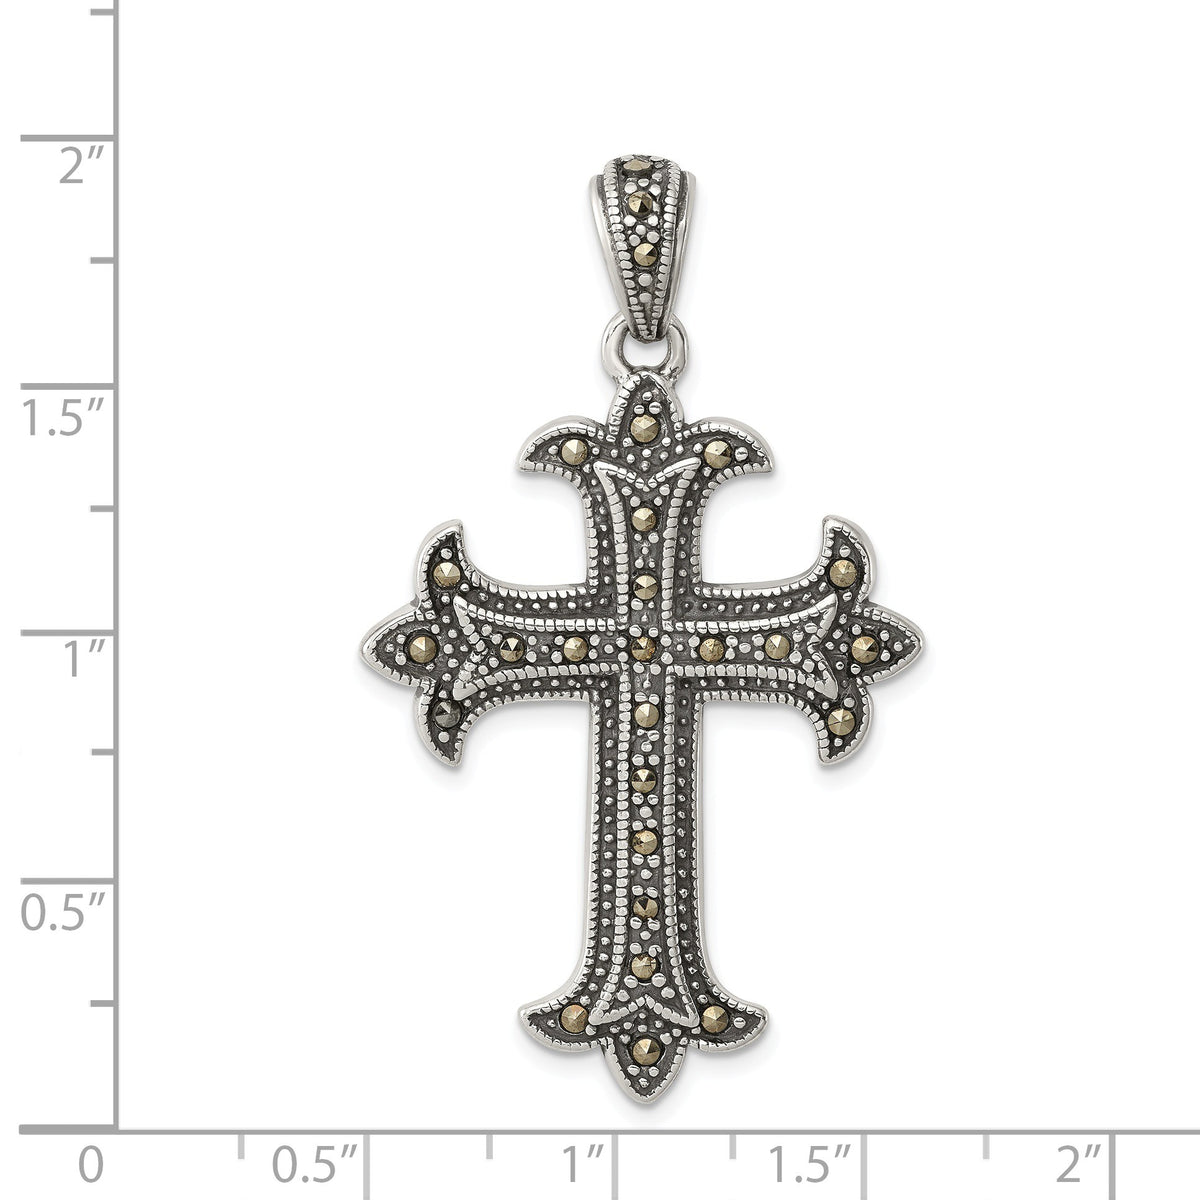 Alternate view of the Sterling Silver and Marcasite Antiqued Fleur de Lis Cross Pendant by The Black Bow Jewelry Co.